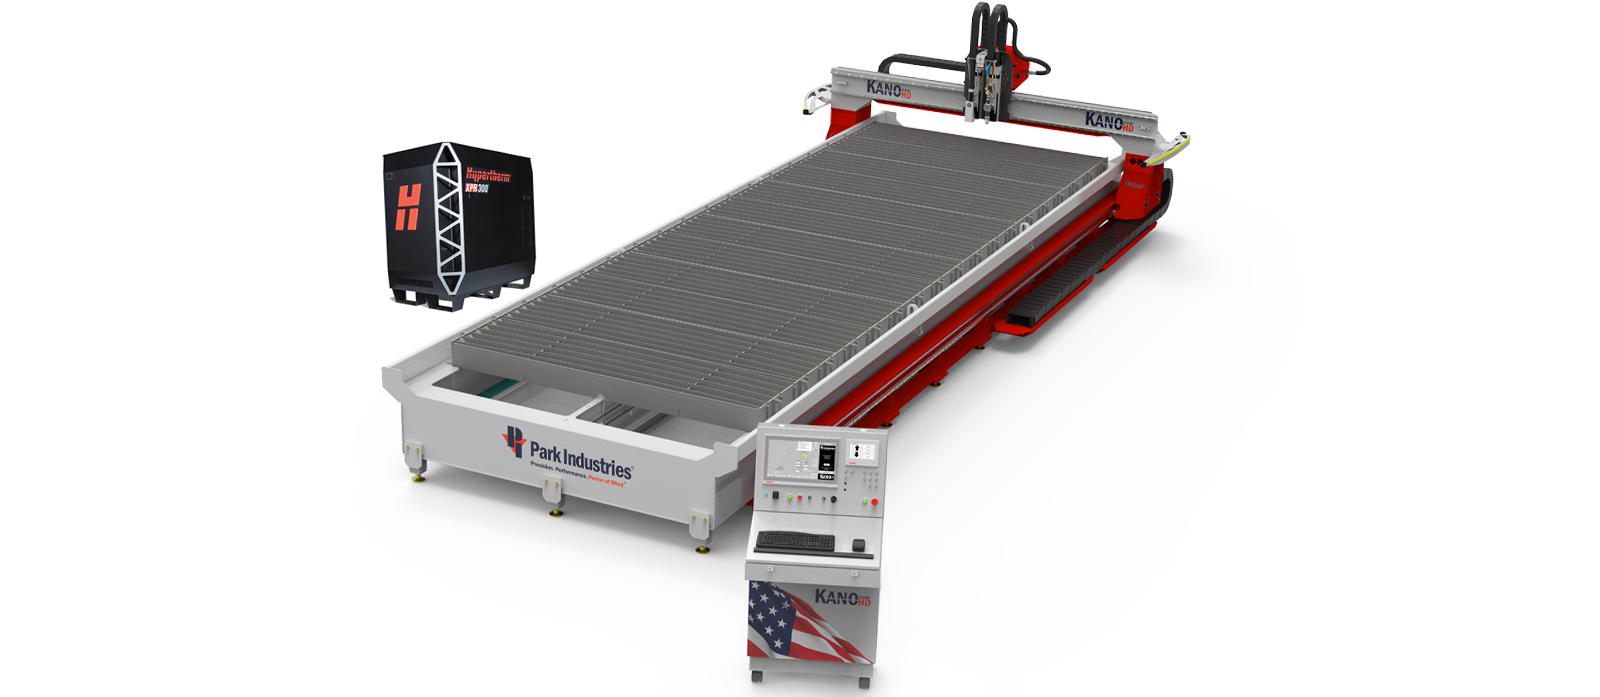 KANO HD CNC Plasma Cutting Machine Full Features Section